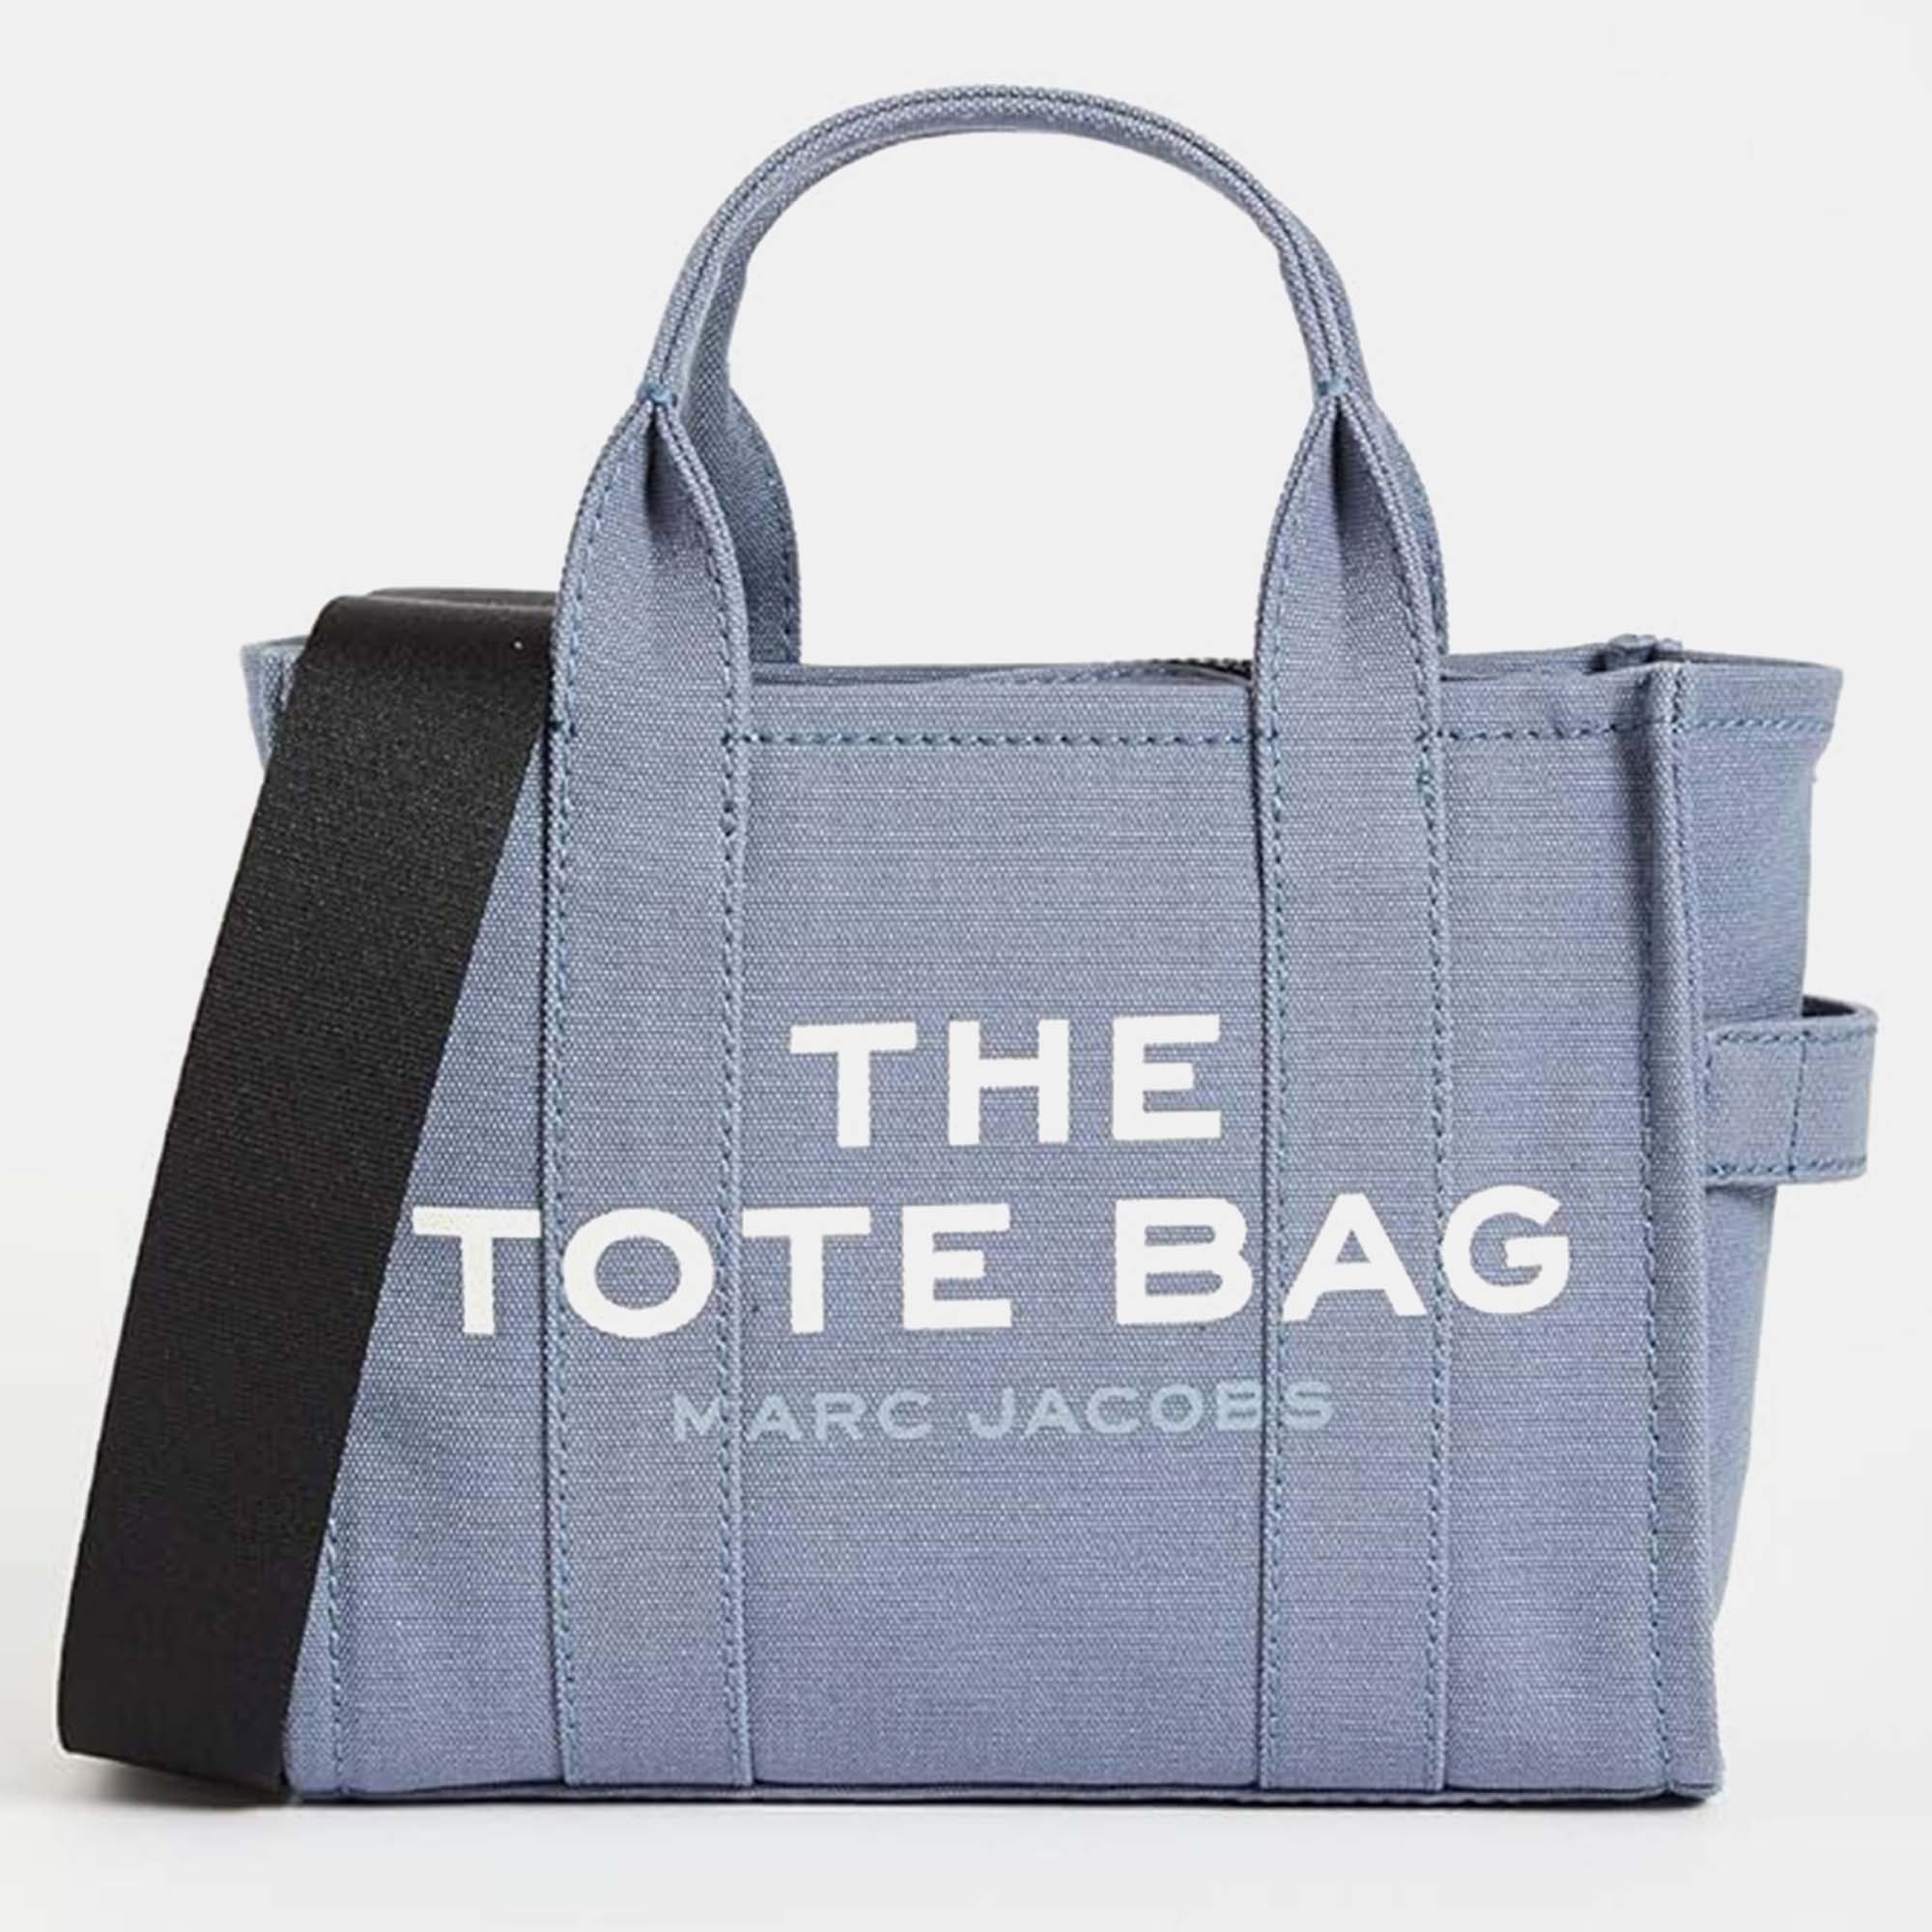 Elevate your every day with this Marc Jacobs tote. Meticulously designed it seamlessly blends functionality with luxury offering the perfect accessory to showcase your discerning style while effortlessly carrying your essentials.